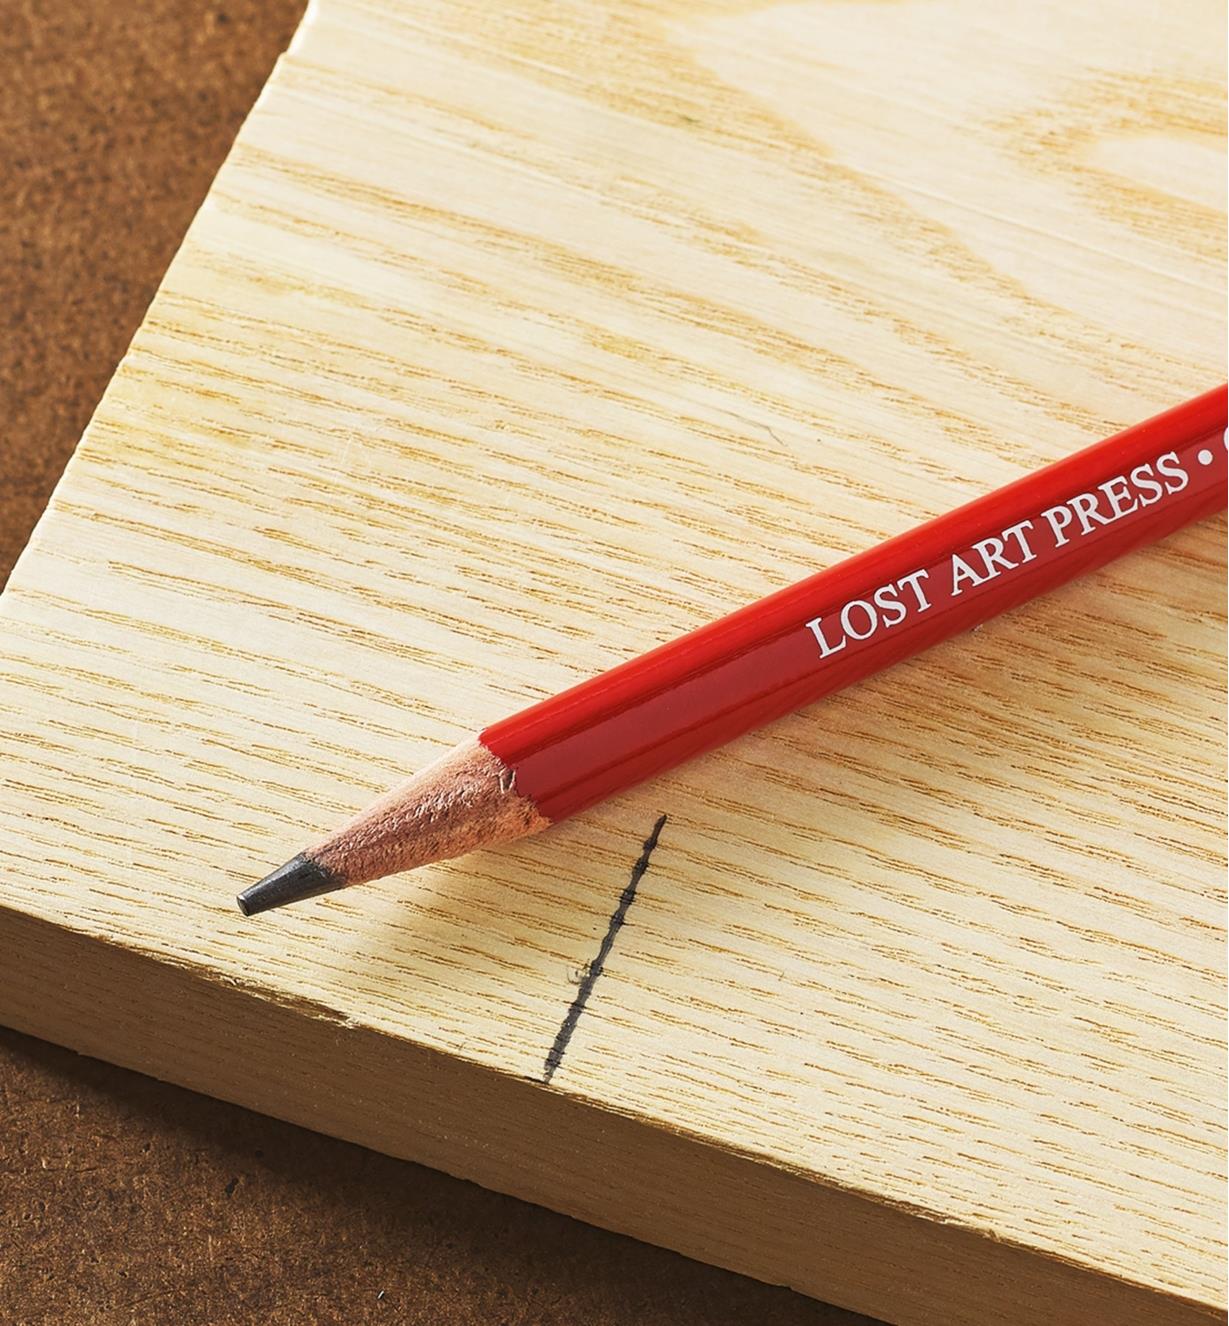 A Lost Art Press woodworking pencil on a piece of wood next to a dark pencil mark